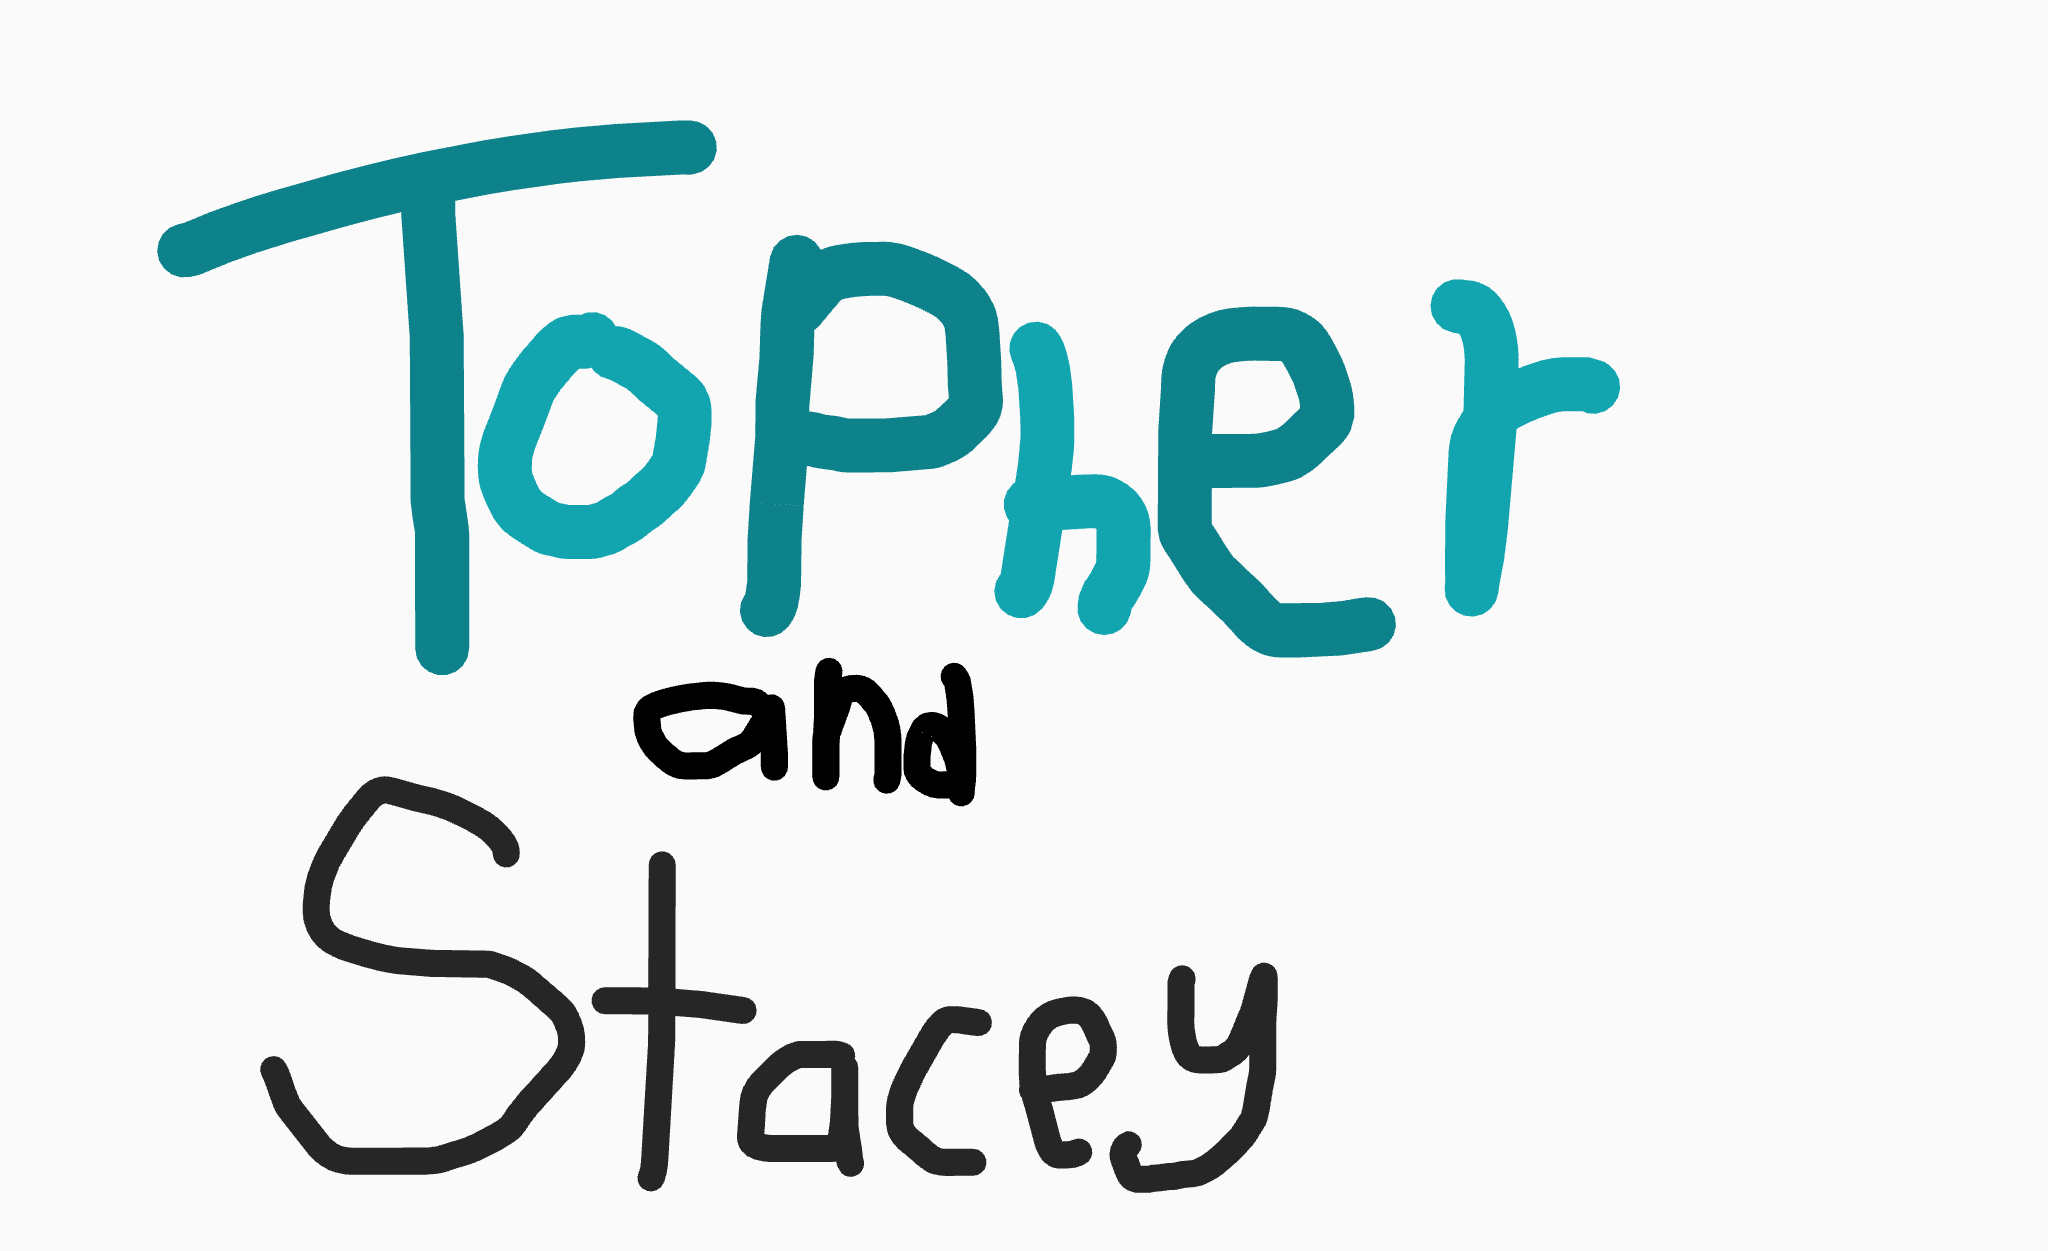 Topher and Stacey, Treehouse tv Wiki